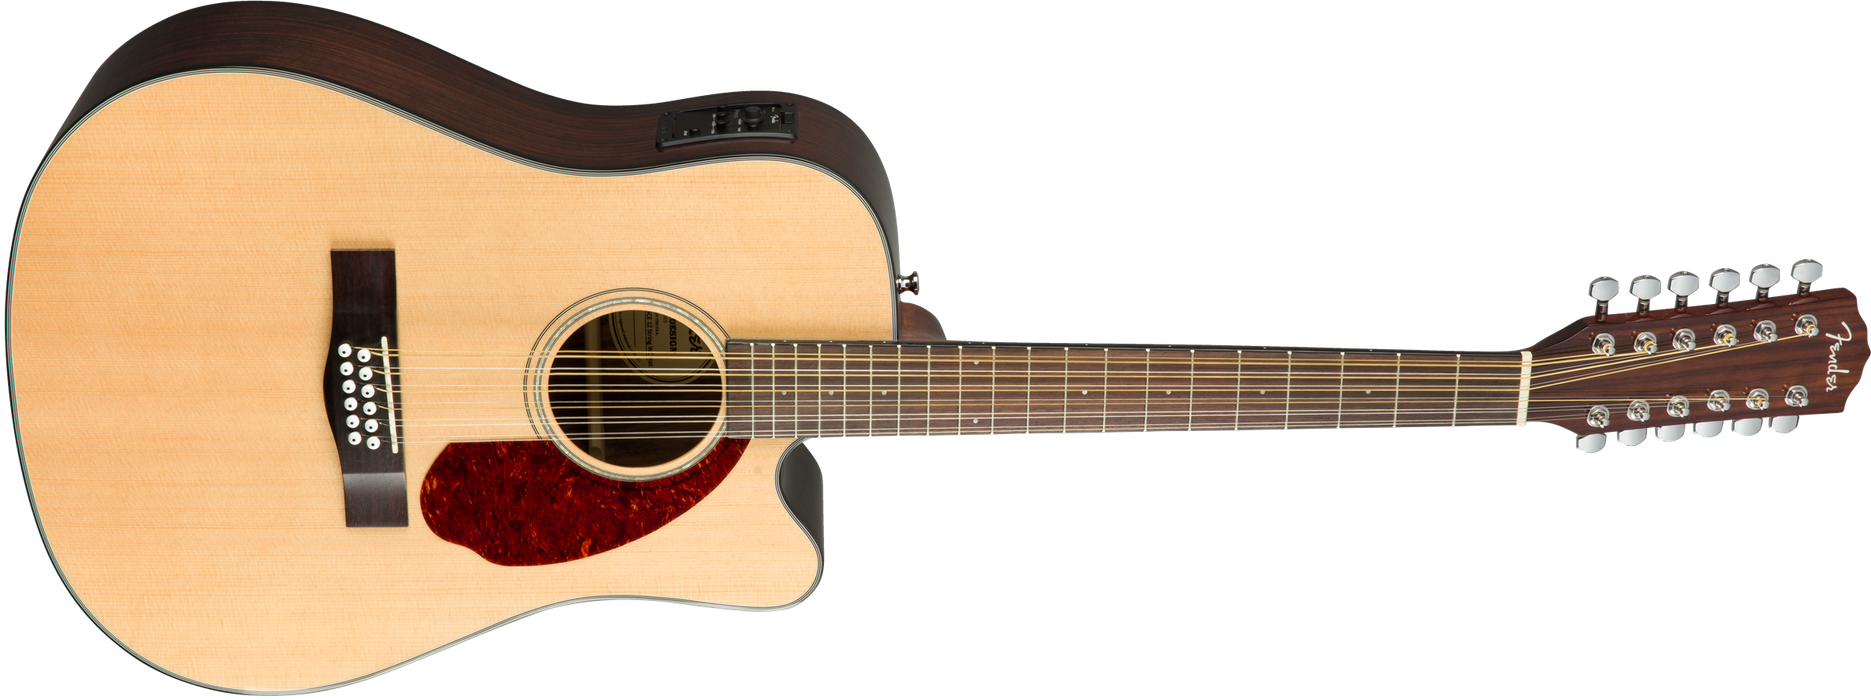 DISC - Fender CD-140SCE 12-string Cutaway Acoustic Electric Guitar Natural Finish With Case